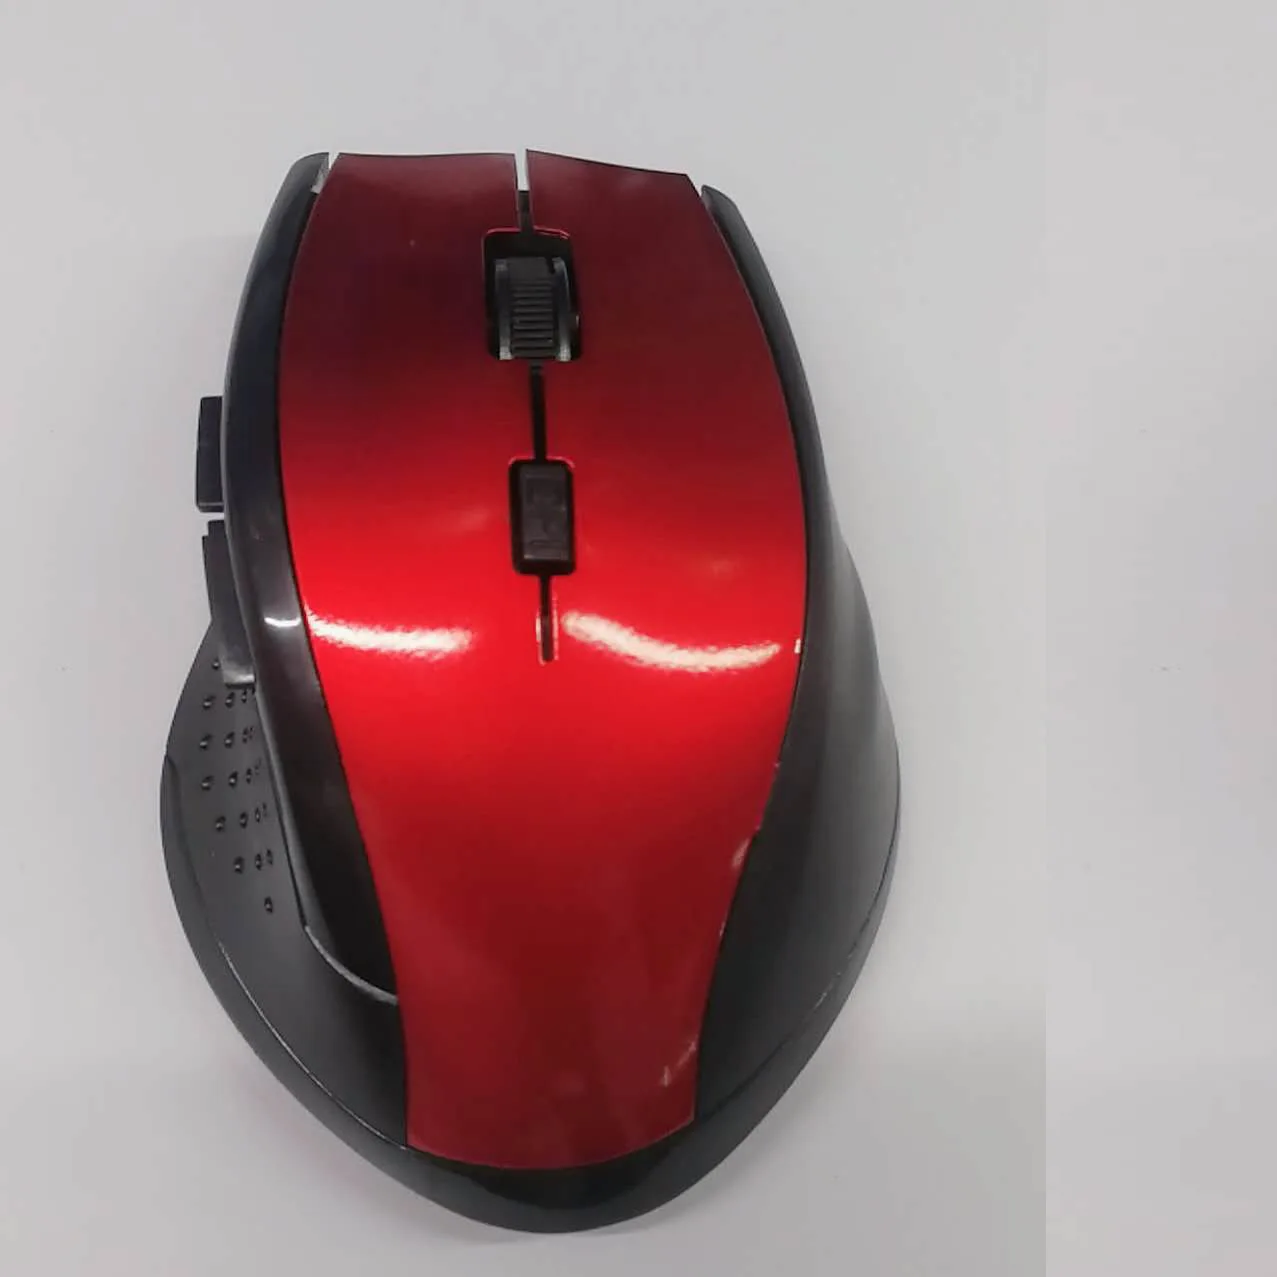 Wireless Mouse Gamer  Wireless Computer Mause  Backlight Ergonomic Gaming Mouse for Laptop PC Mice  raton inalambrico ordenador images - 6